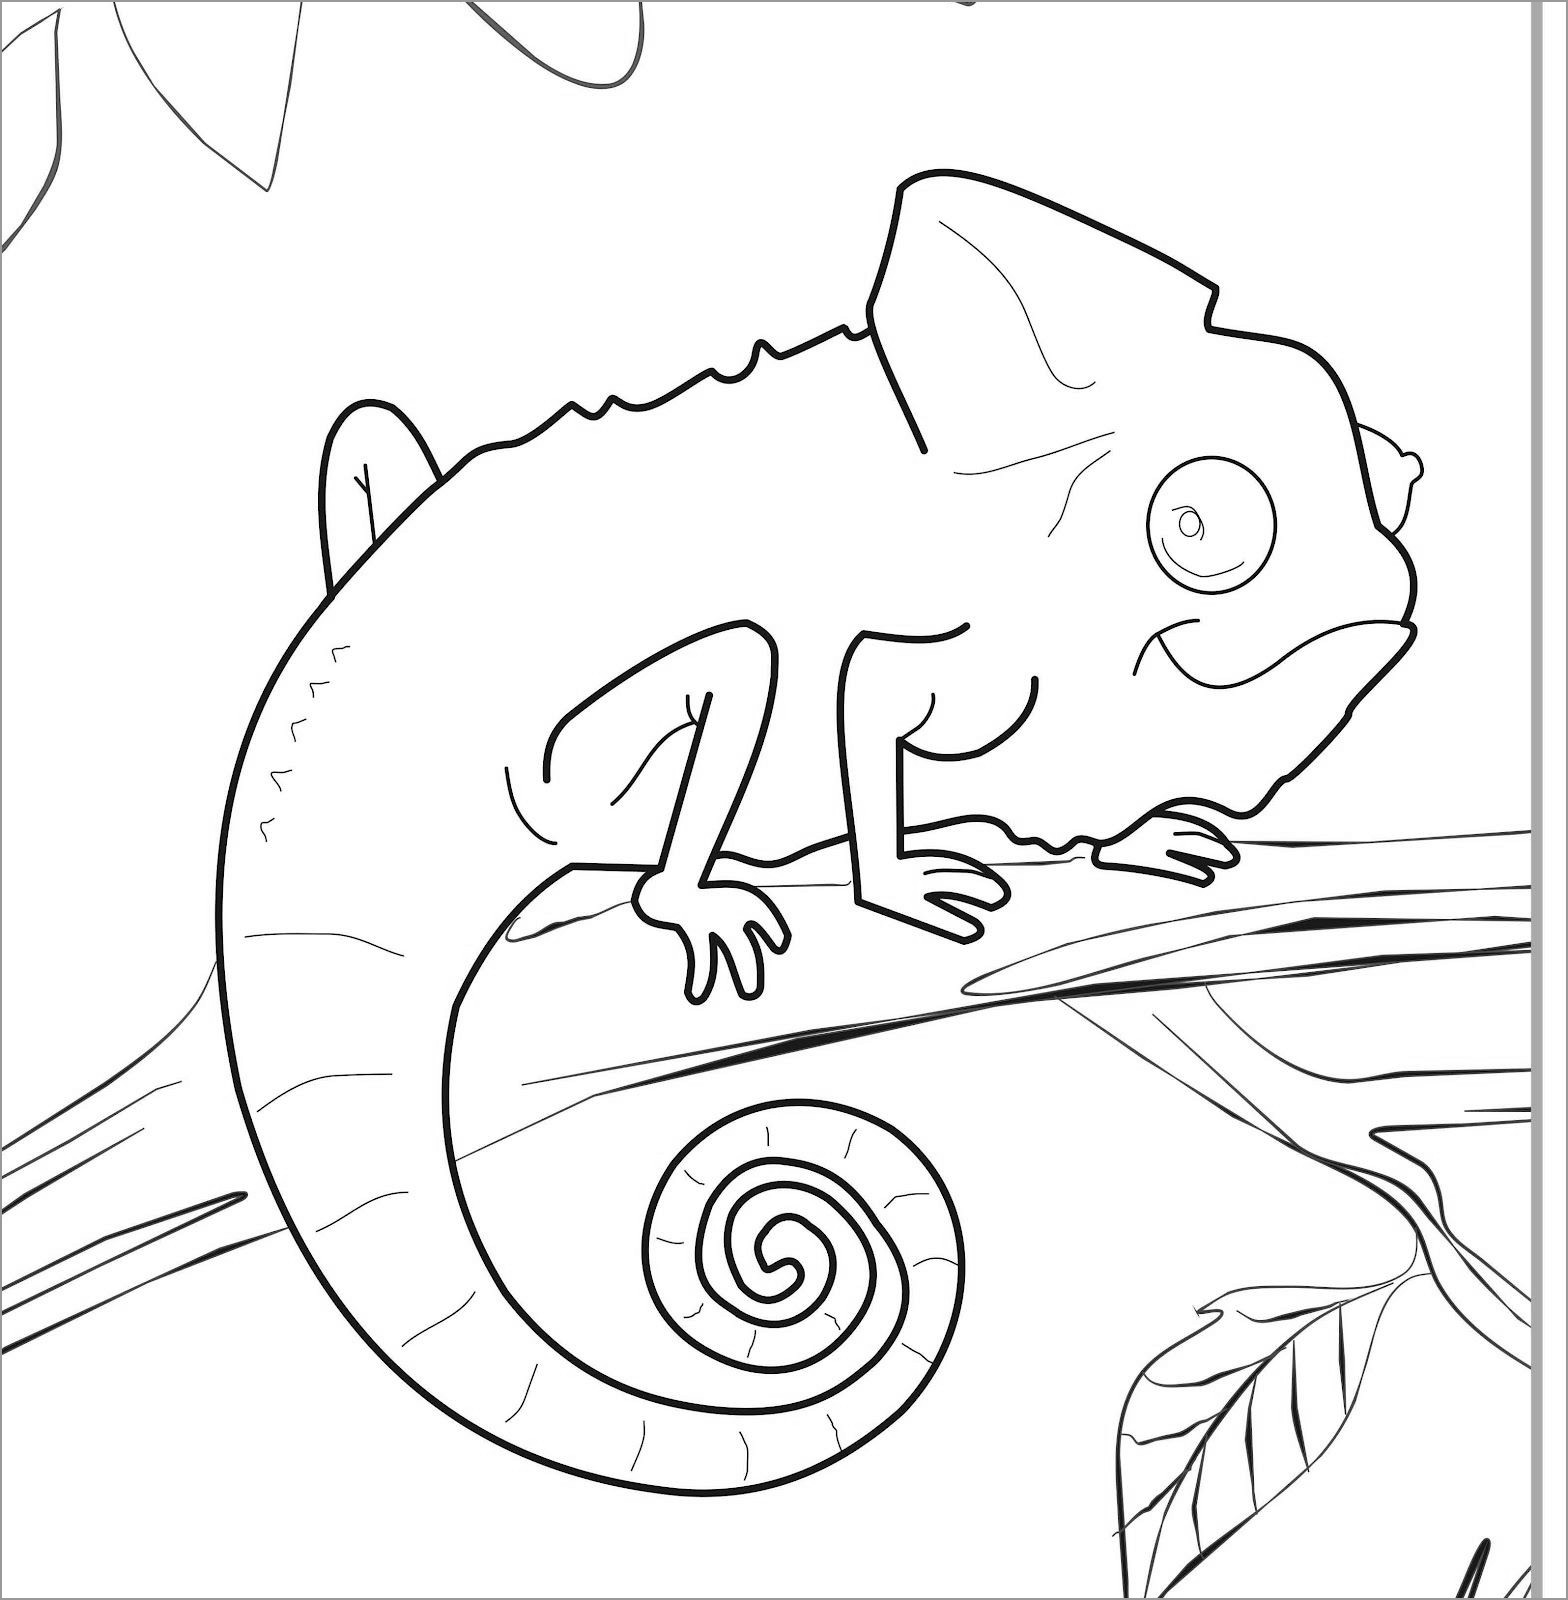 Chameleon Lizard Coloring Pages